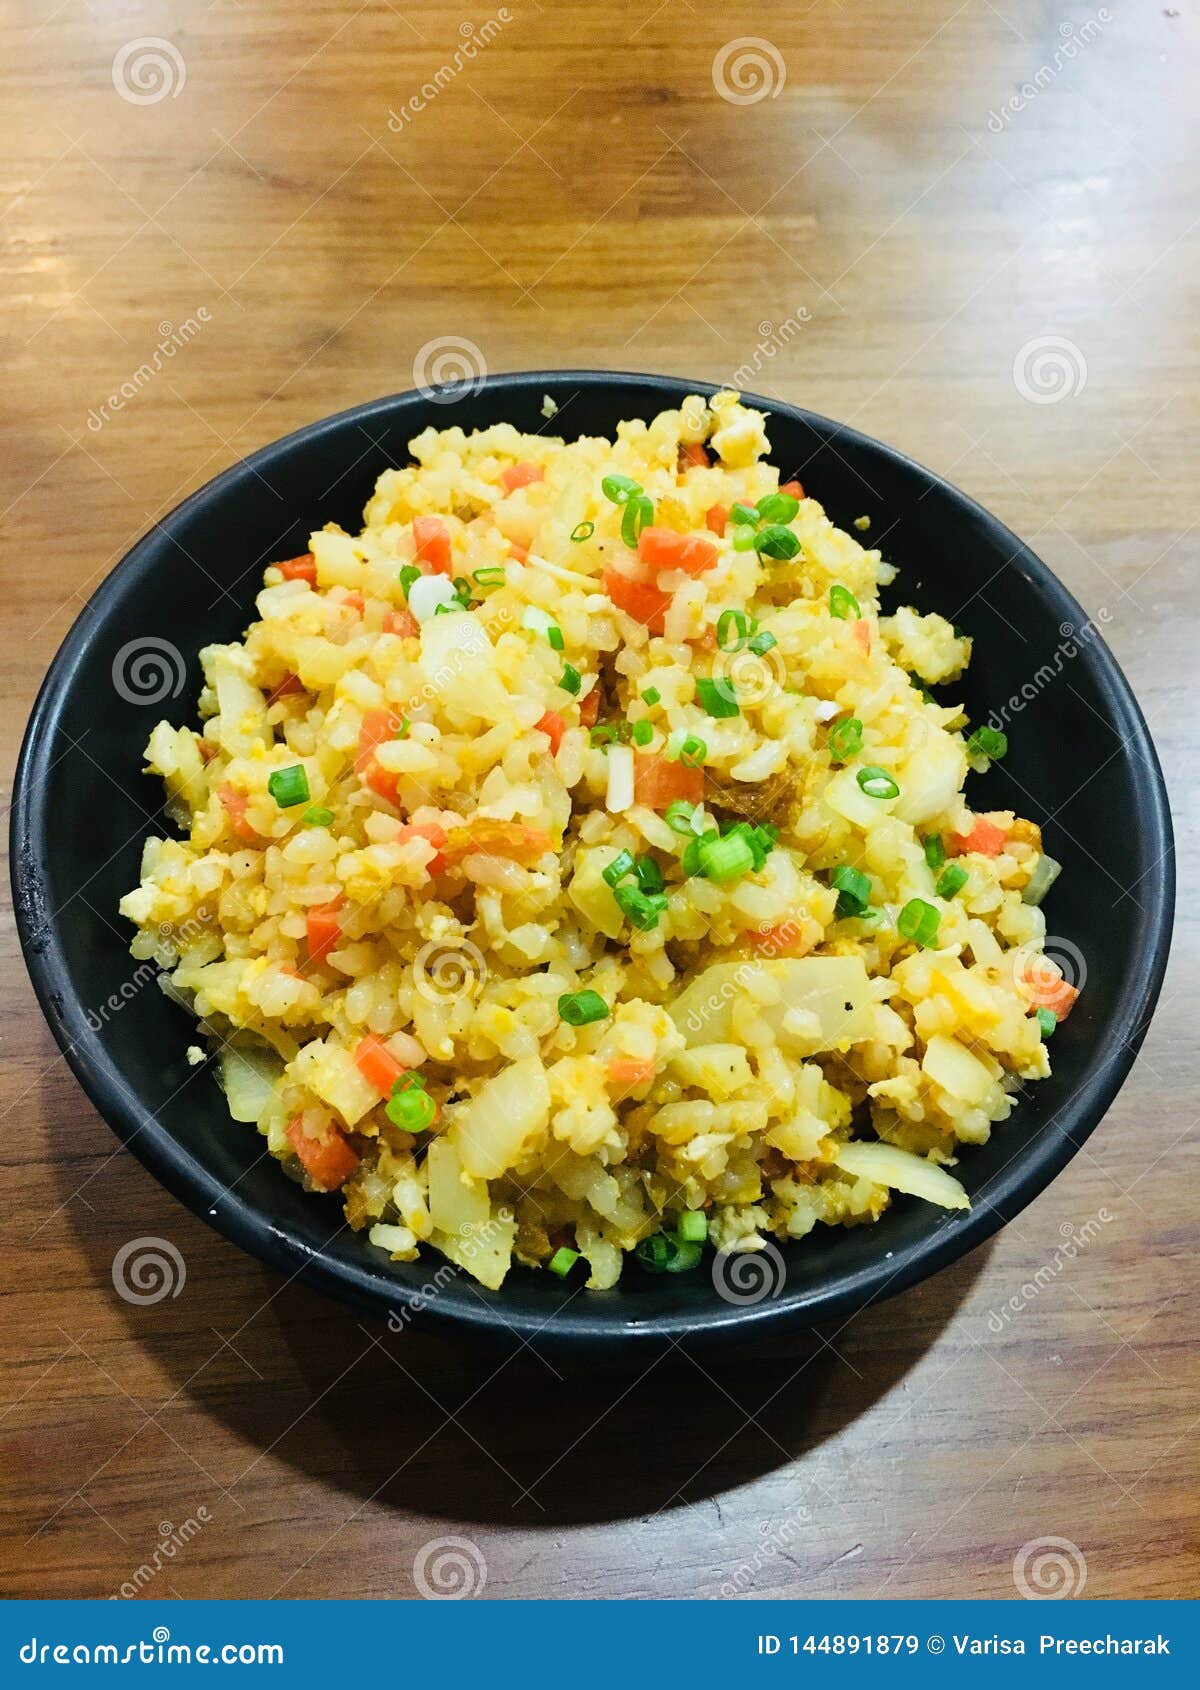 Fried Rice With Garlic In Japanese Style Stock Image - Image of garlic